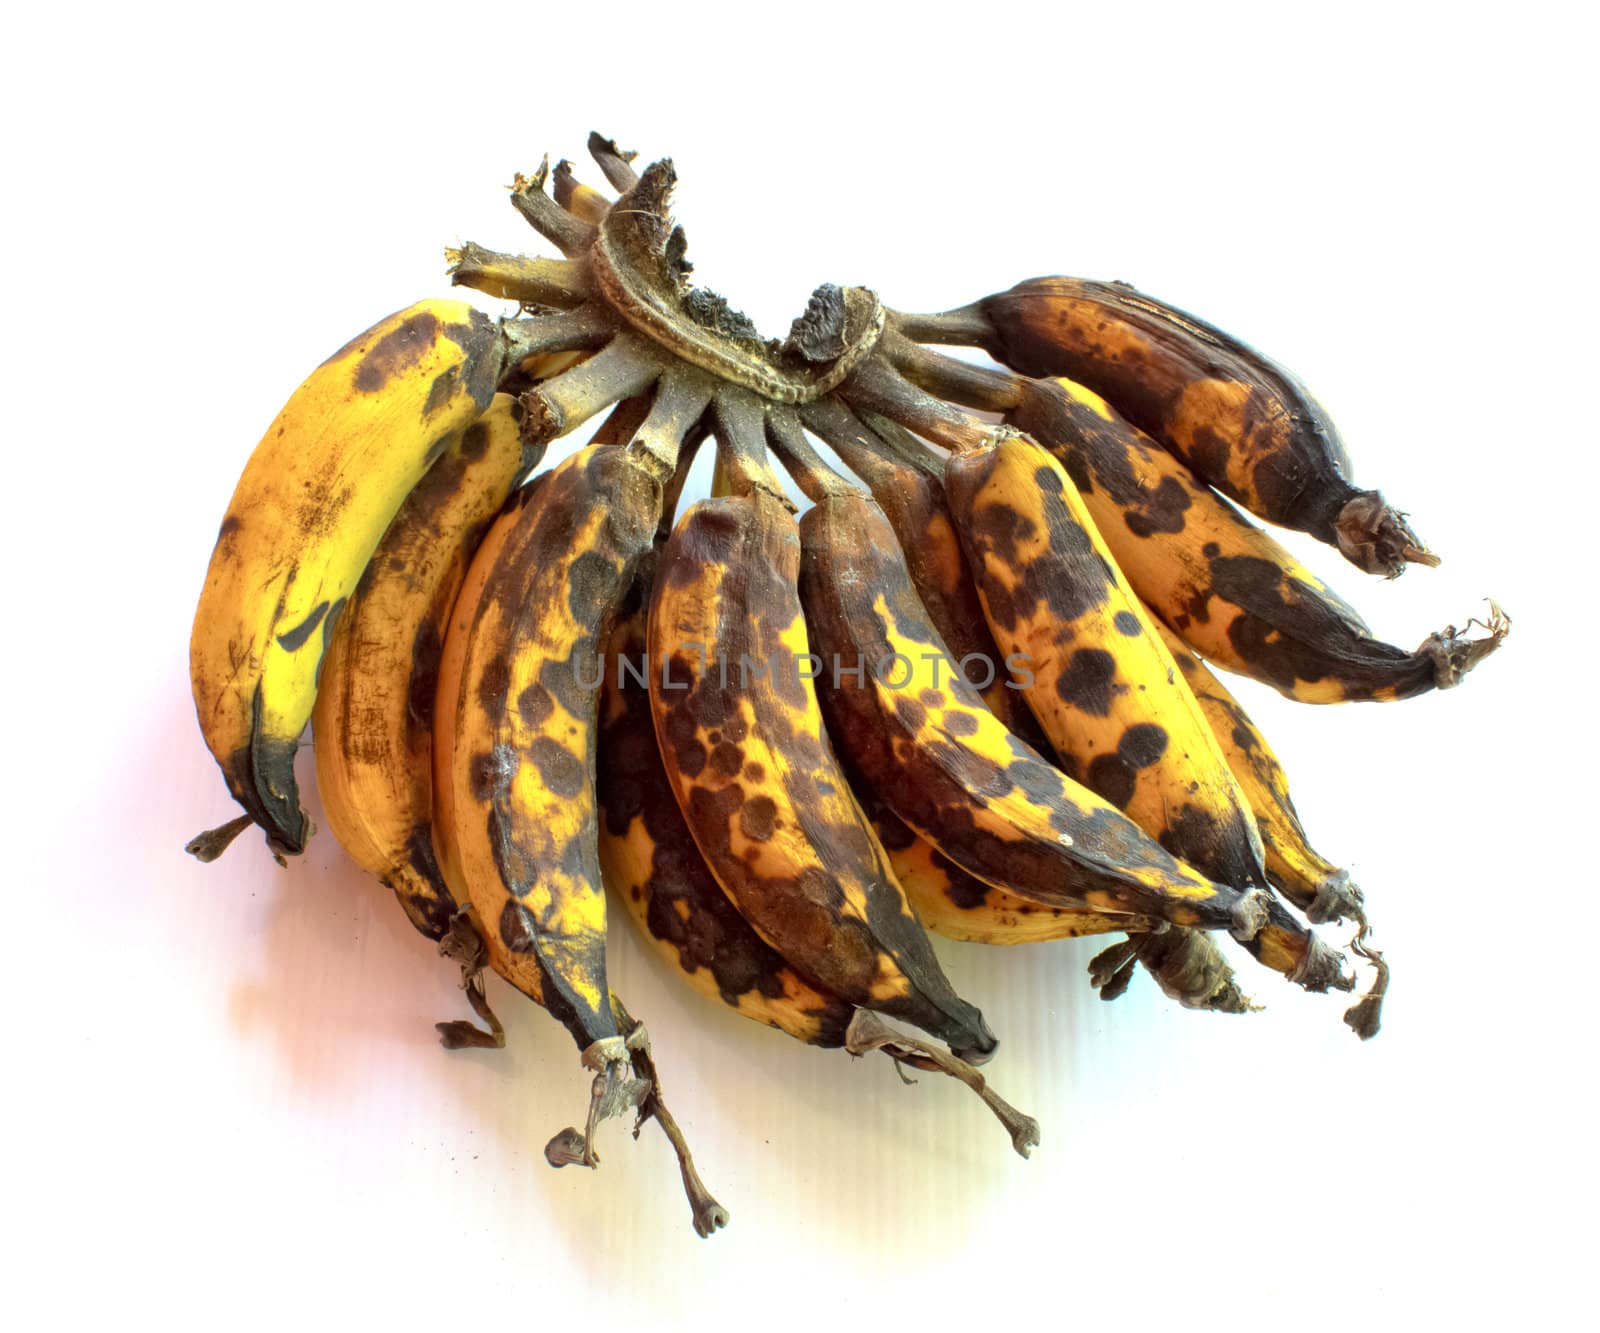 Overripe bananas in front of a white background